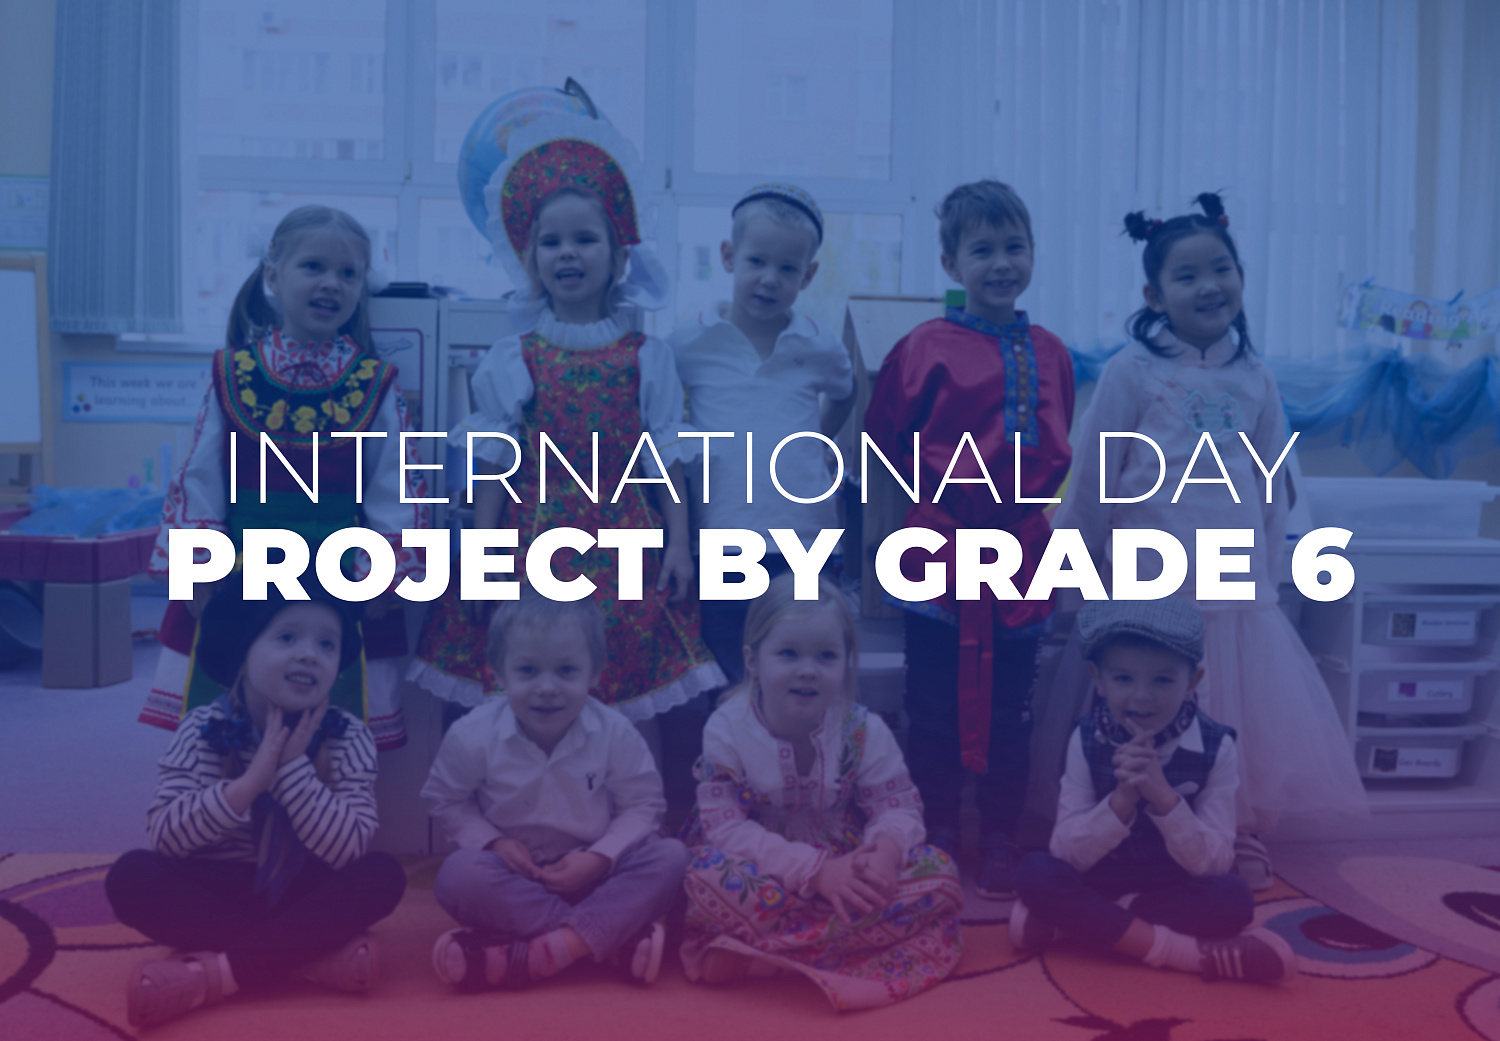 Grade 6 students' International Day Project